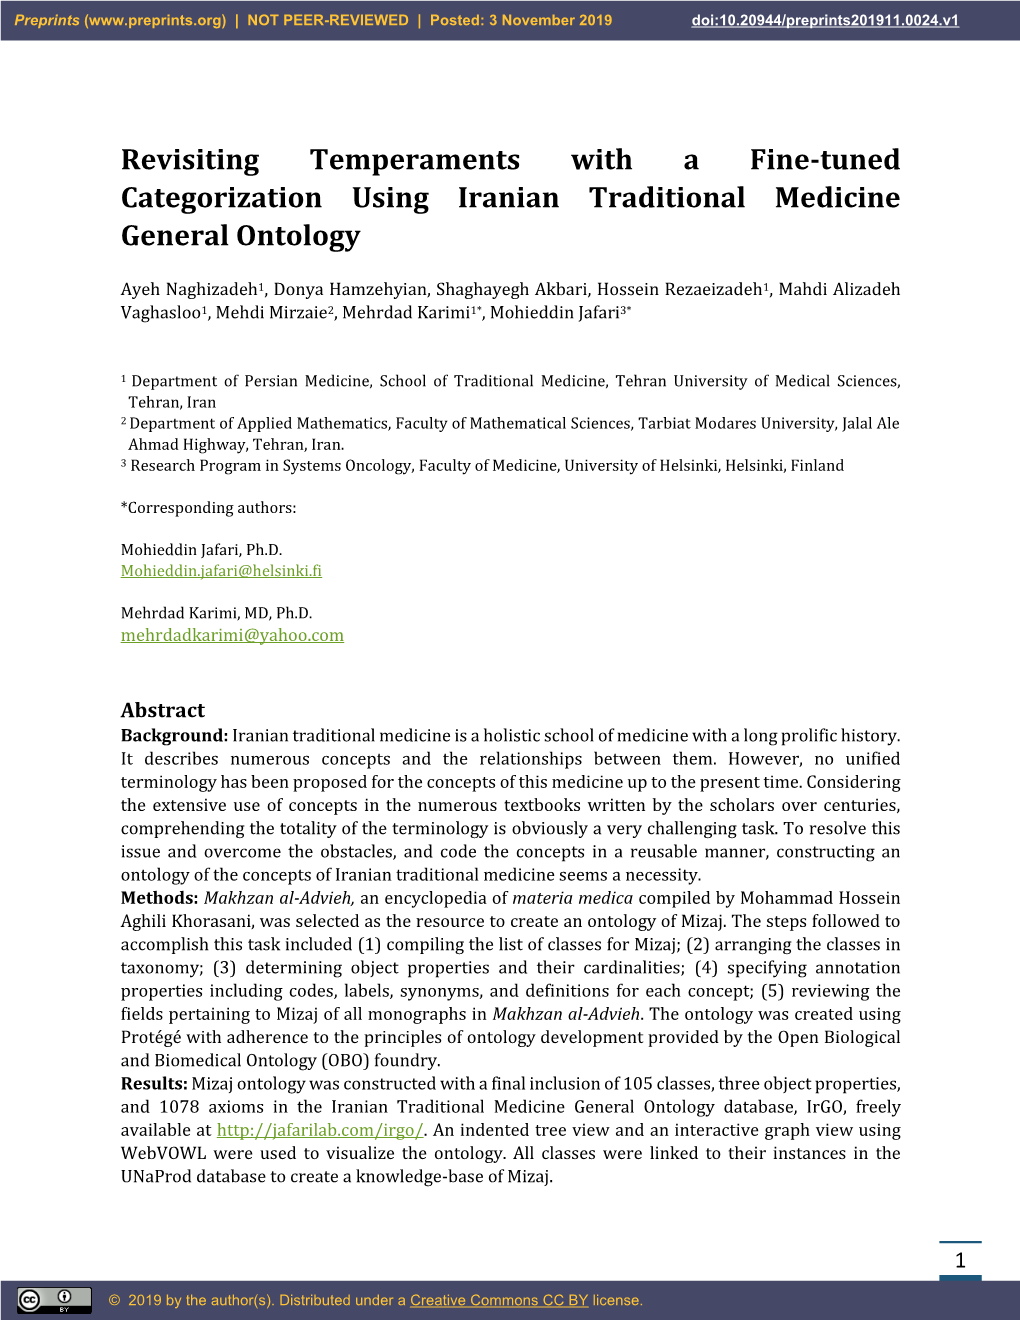 Revisiting Temperaments with a Fine-Tuned Categorization Using Iranian Traditional Medicine General Ontology